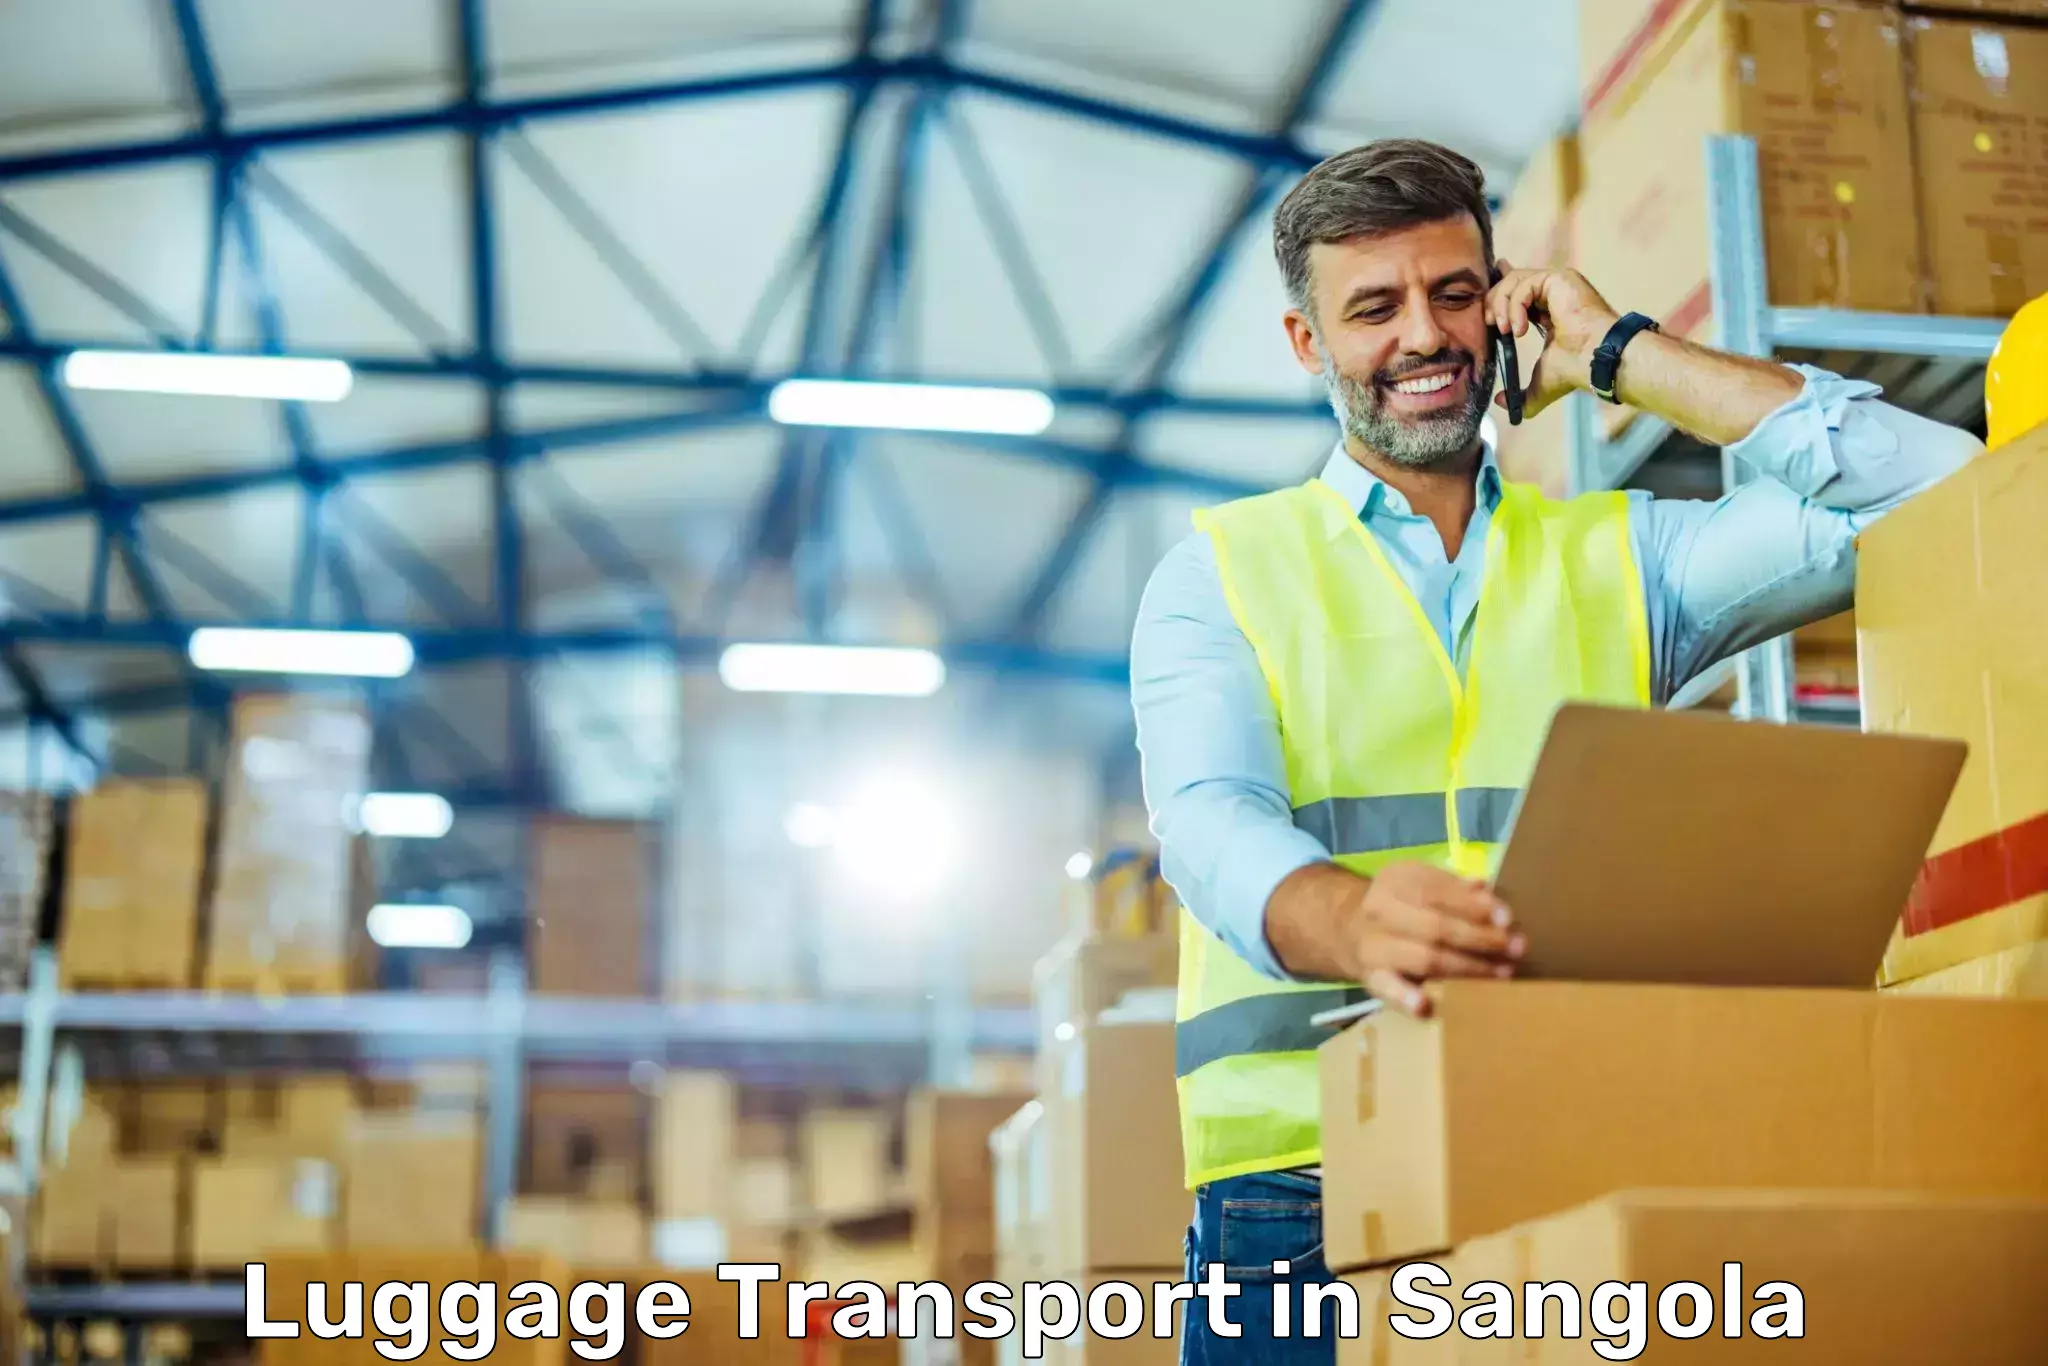 Baggage transport network in Sangola